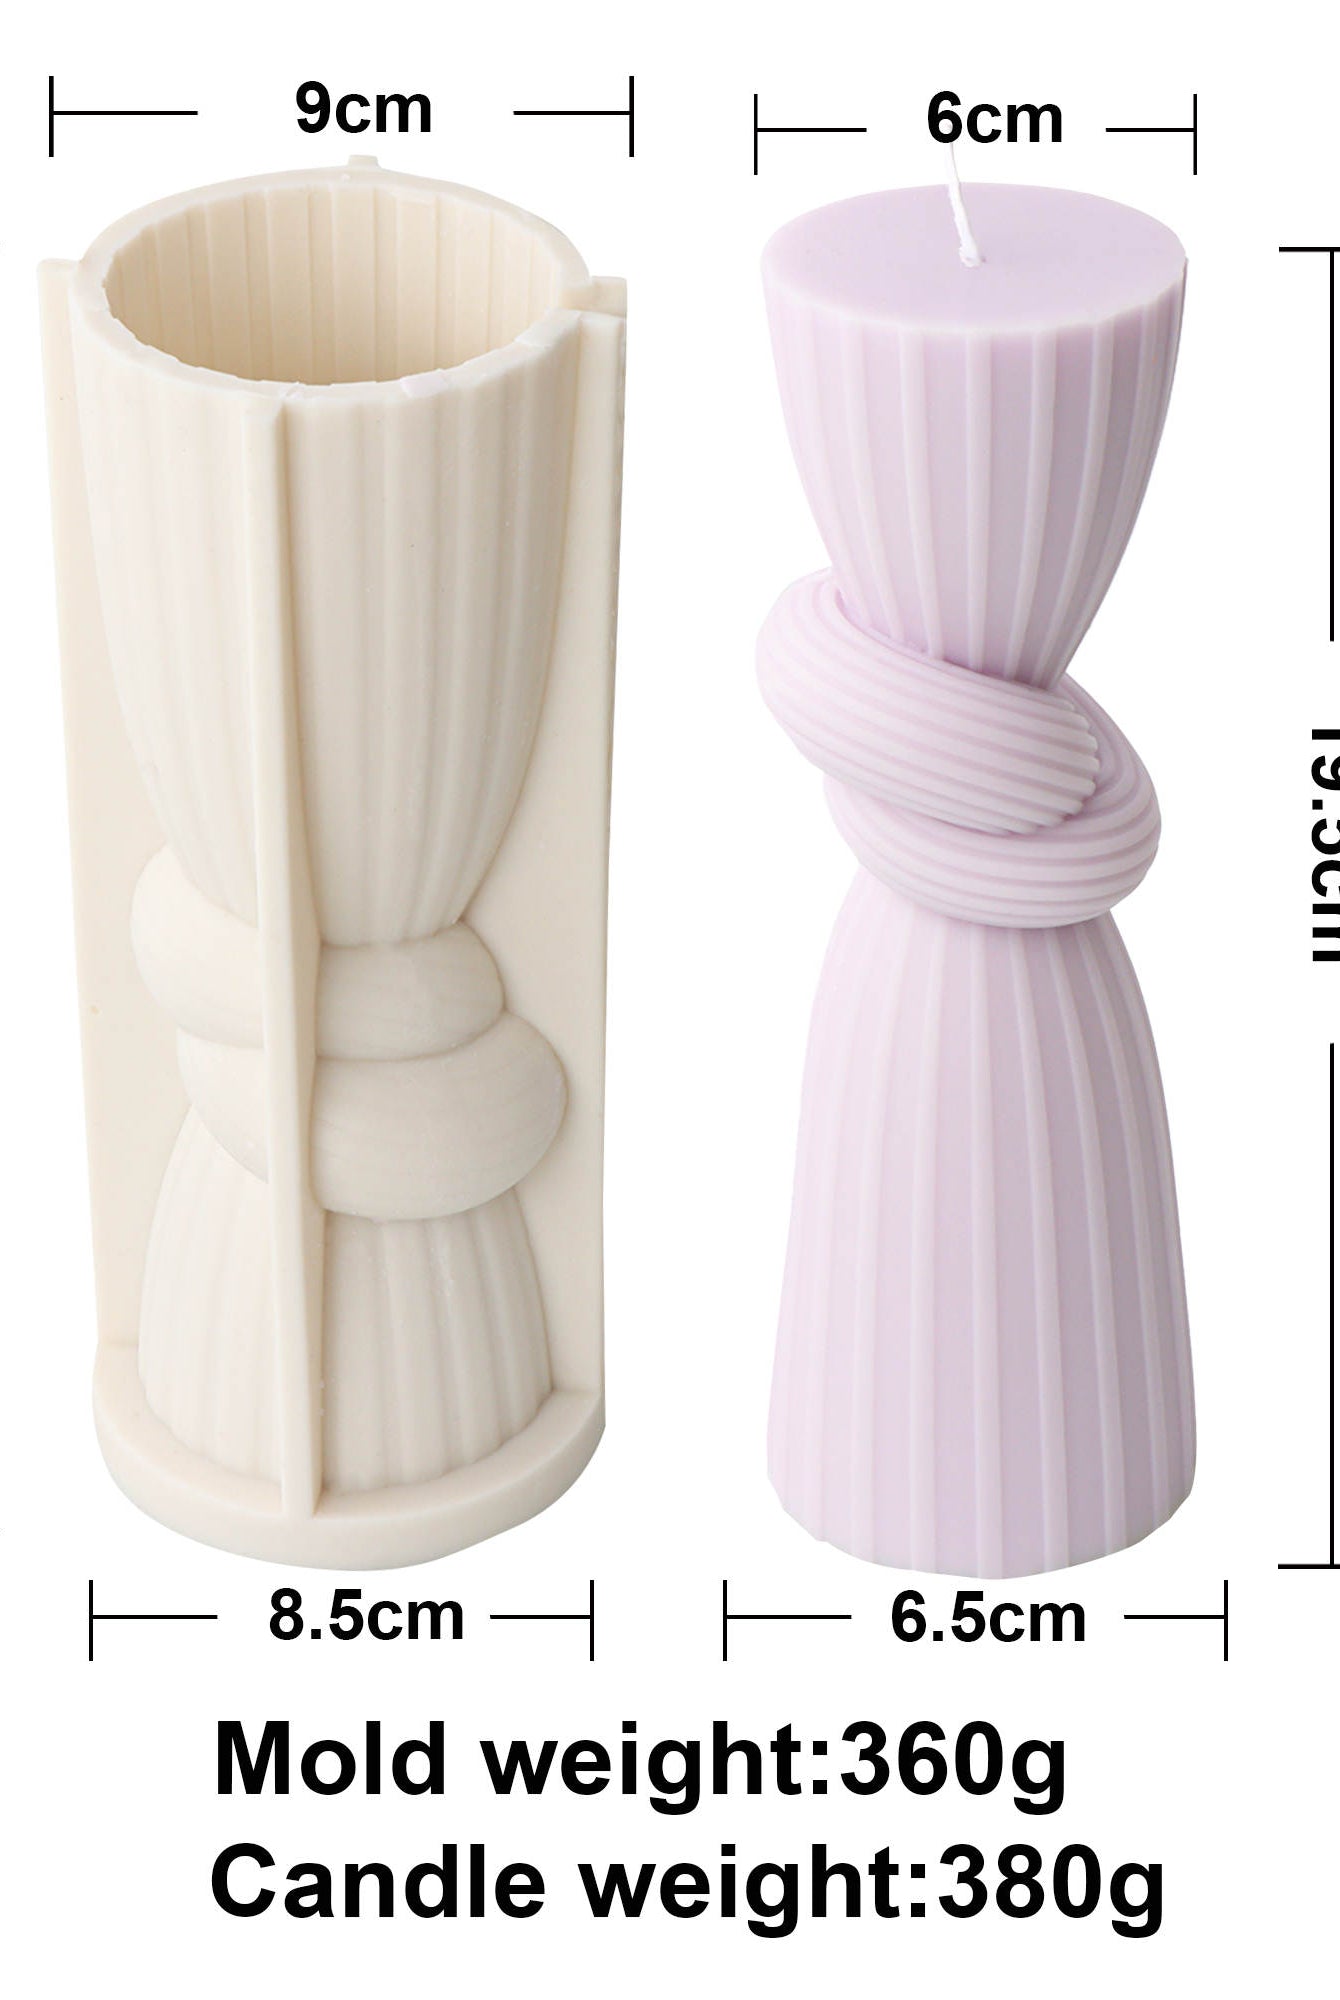 Tie the Knot Pillar Candle Mould 3 - Silicone Mould, Mold for DIY Candles. Created using candle making kit with cotton candle wicks and candle colour chips. Using soy wax for pillar candles. Sold by Myka Candles Moulds Australia